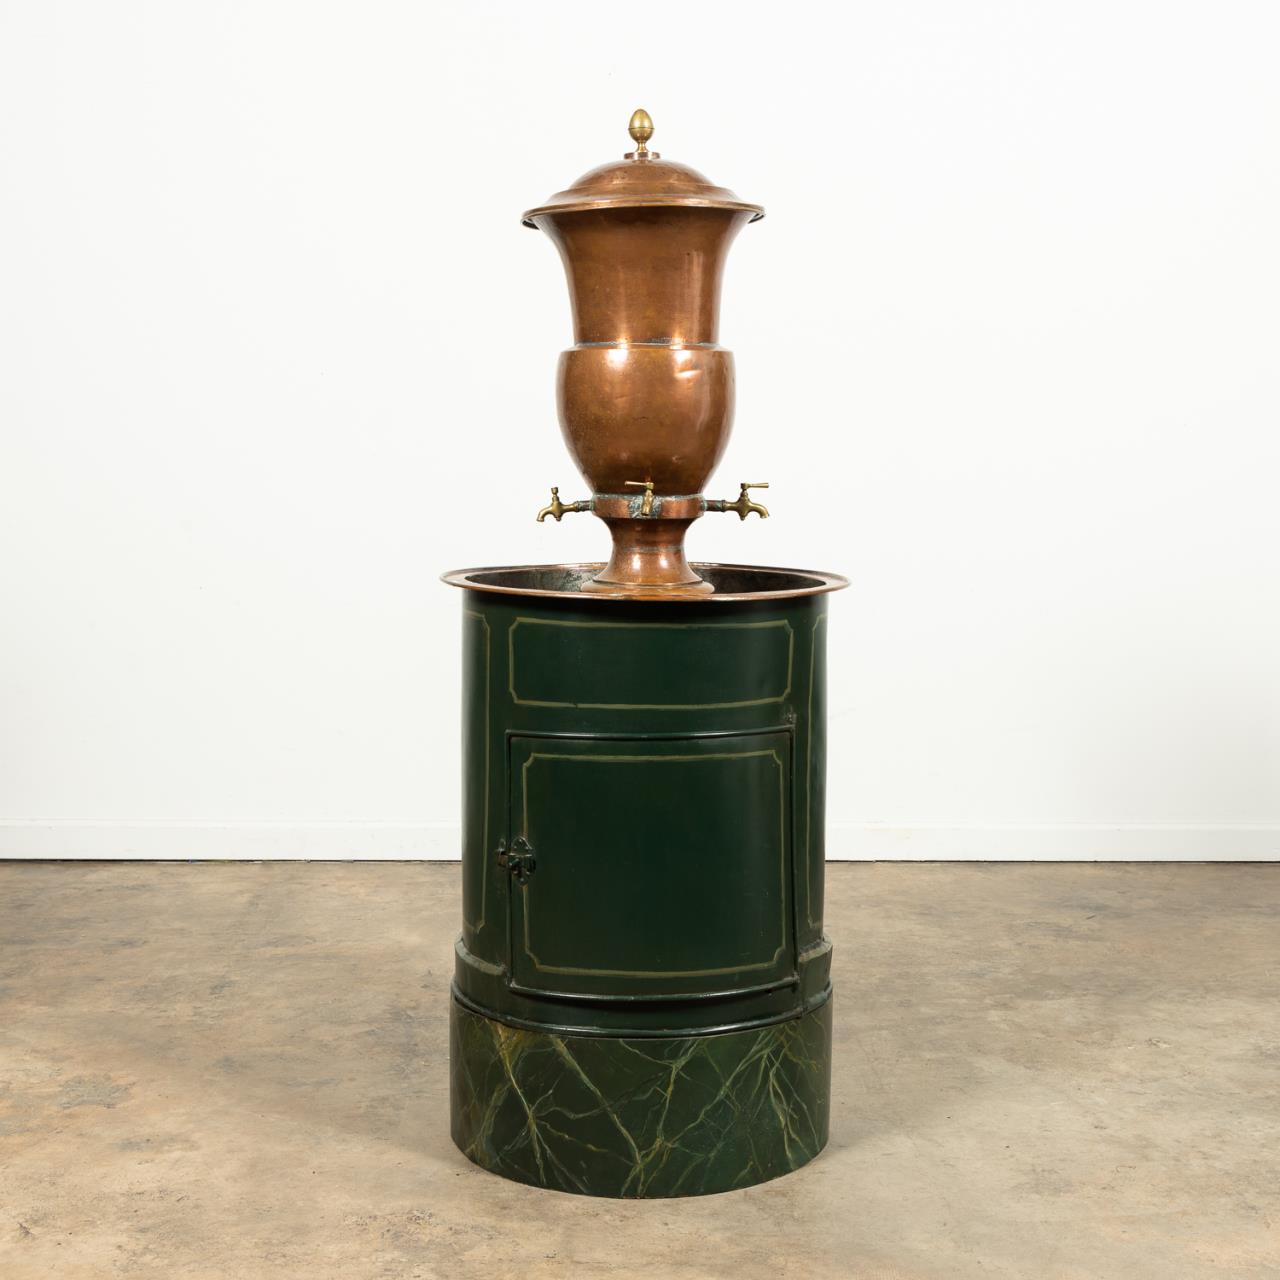 FRENCH COPPER WATER FOUNTAIN ON 35a3f0